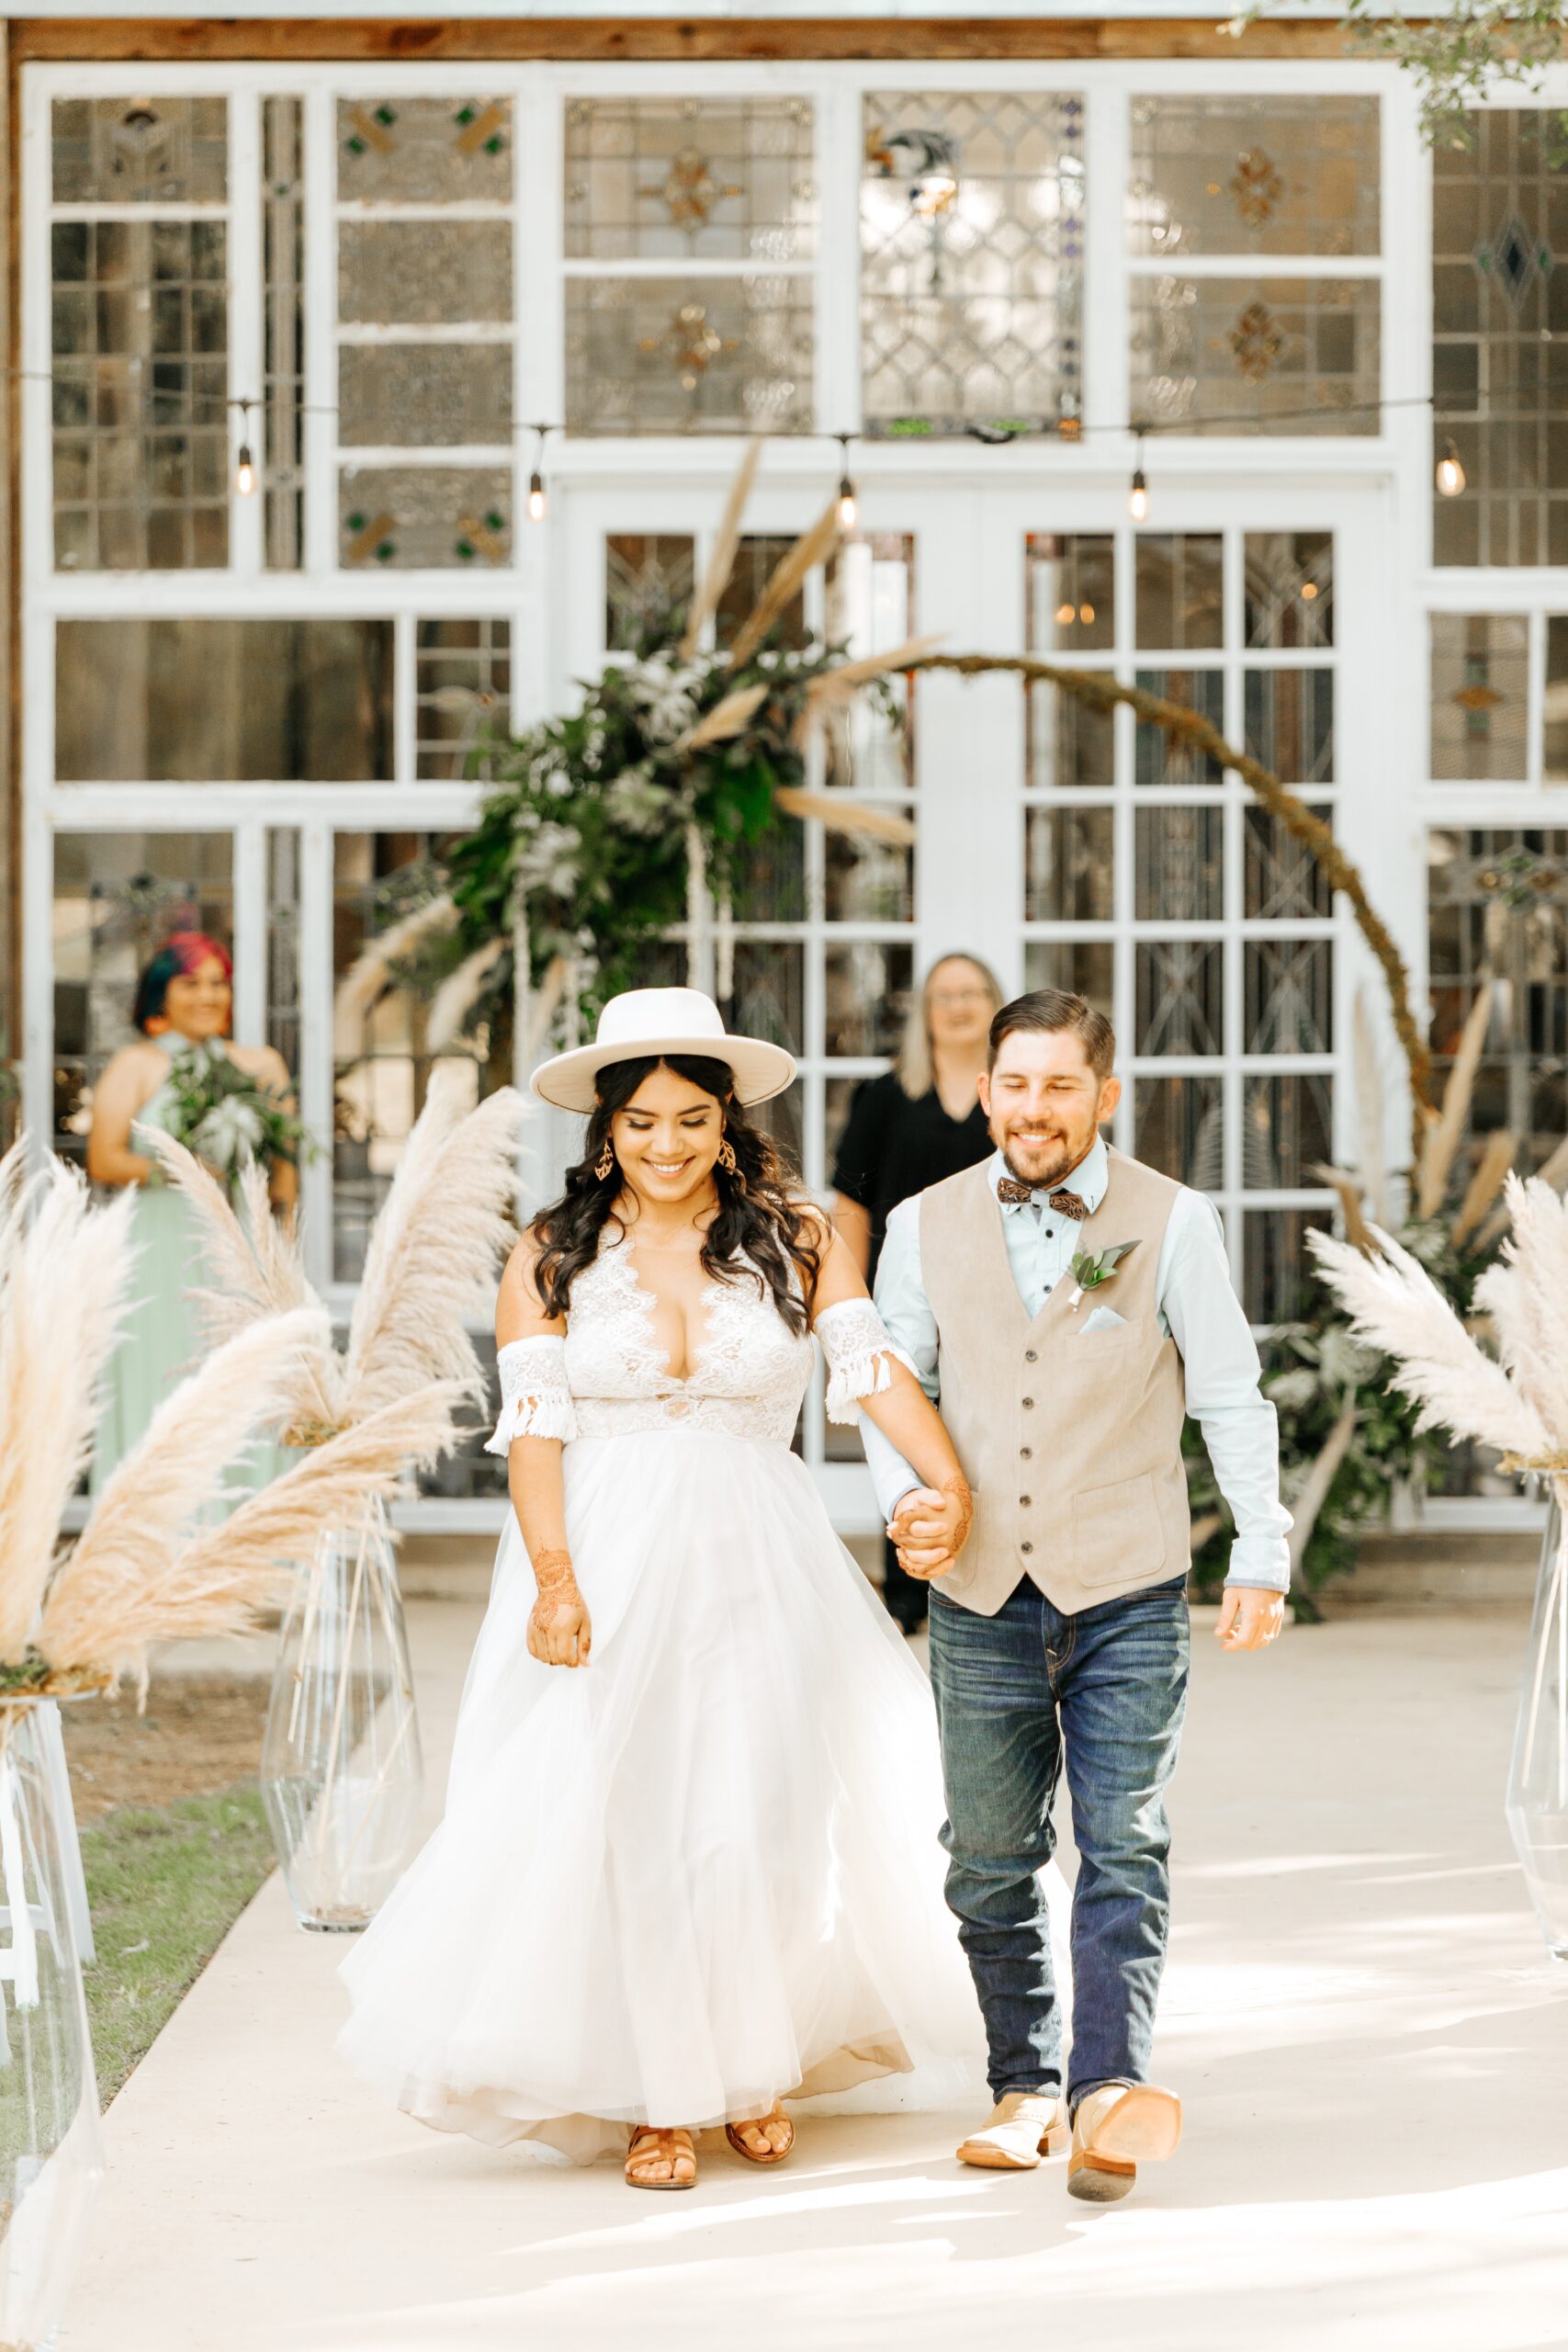 Jeannette and Caleb's Outdoor Wedding at Harper Hill Ranch